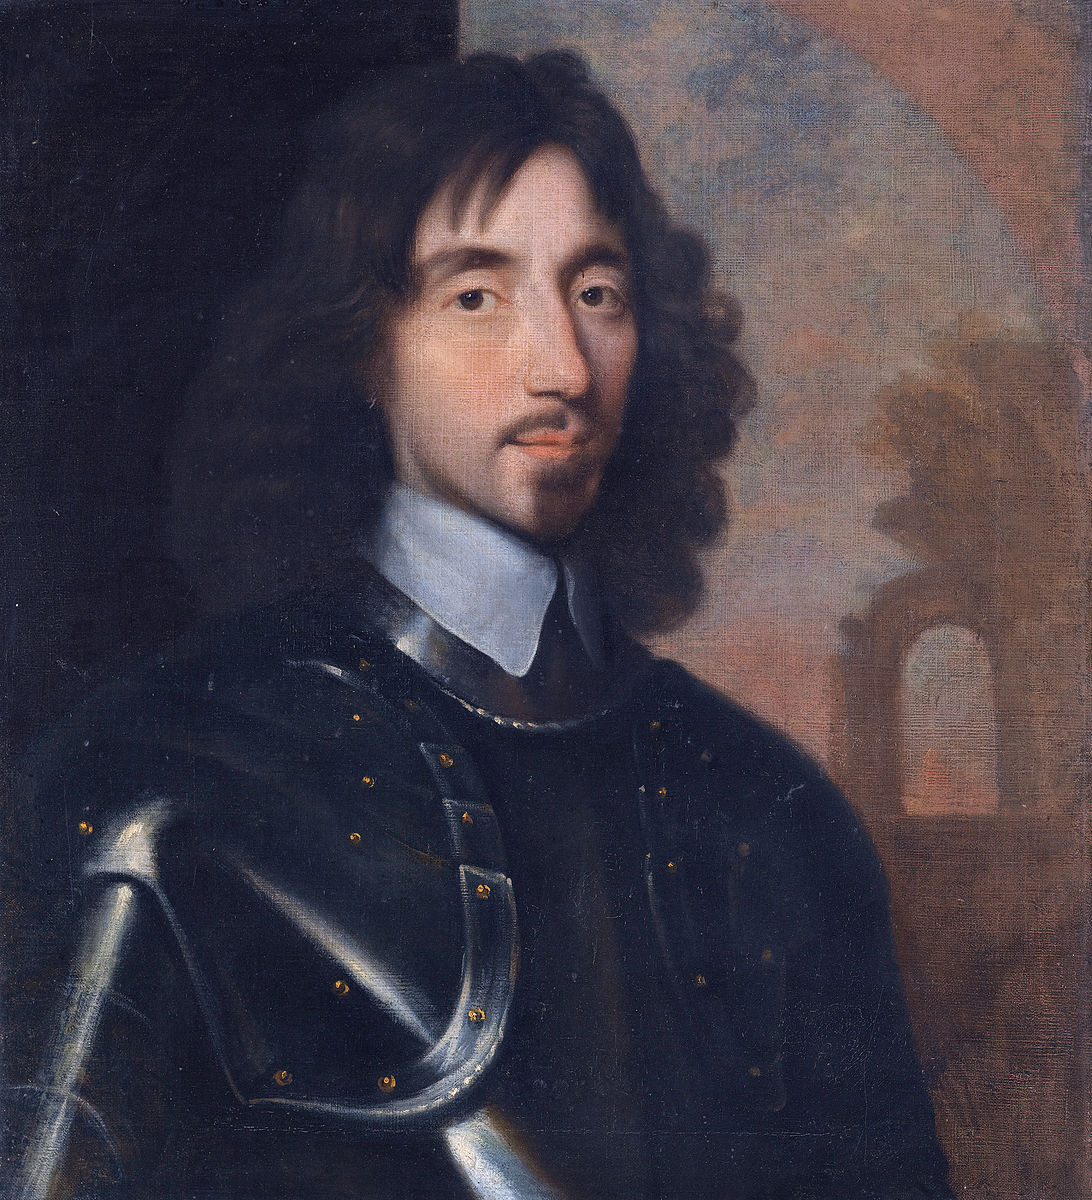 General Thomas Fairfax (1612-1671) by Robert Walker. Wiki Commons.